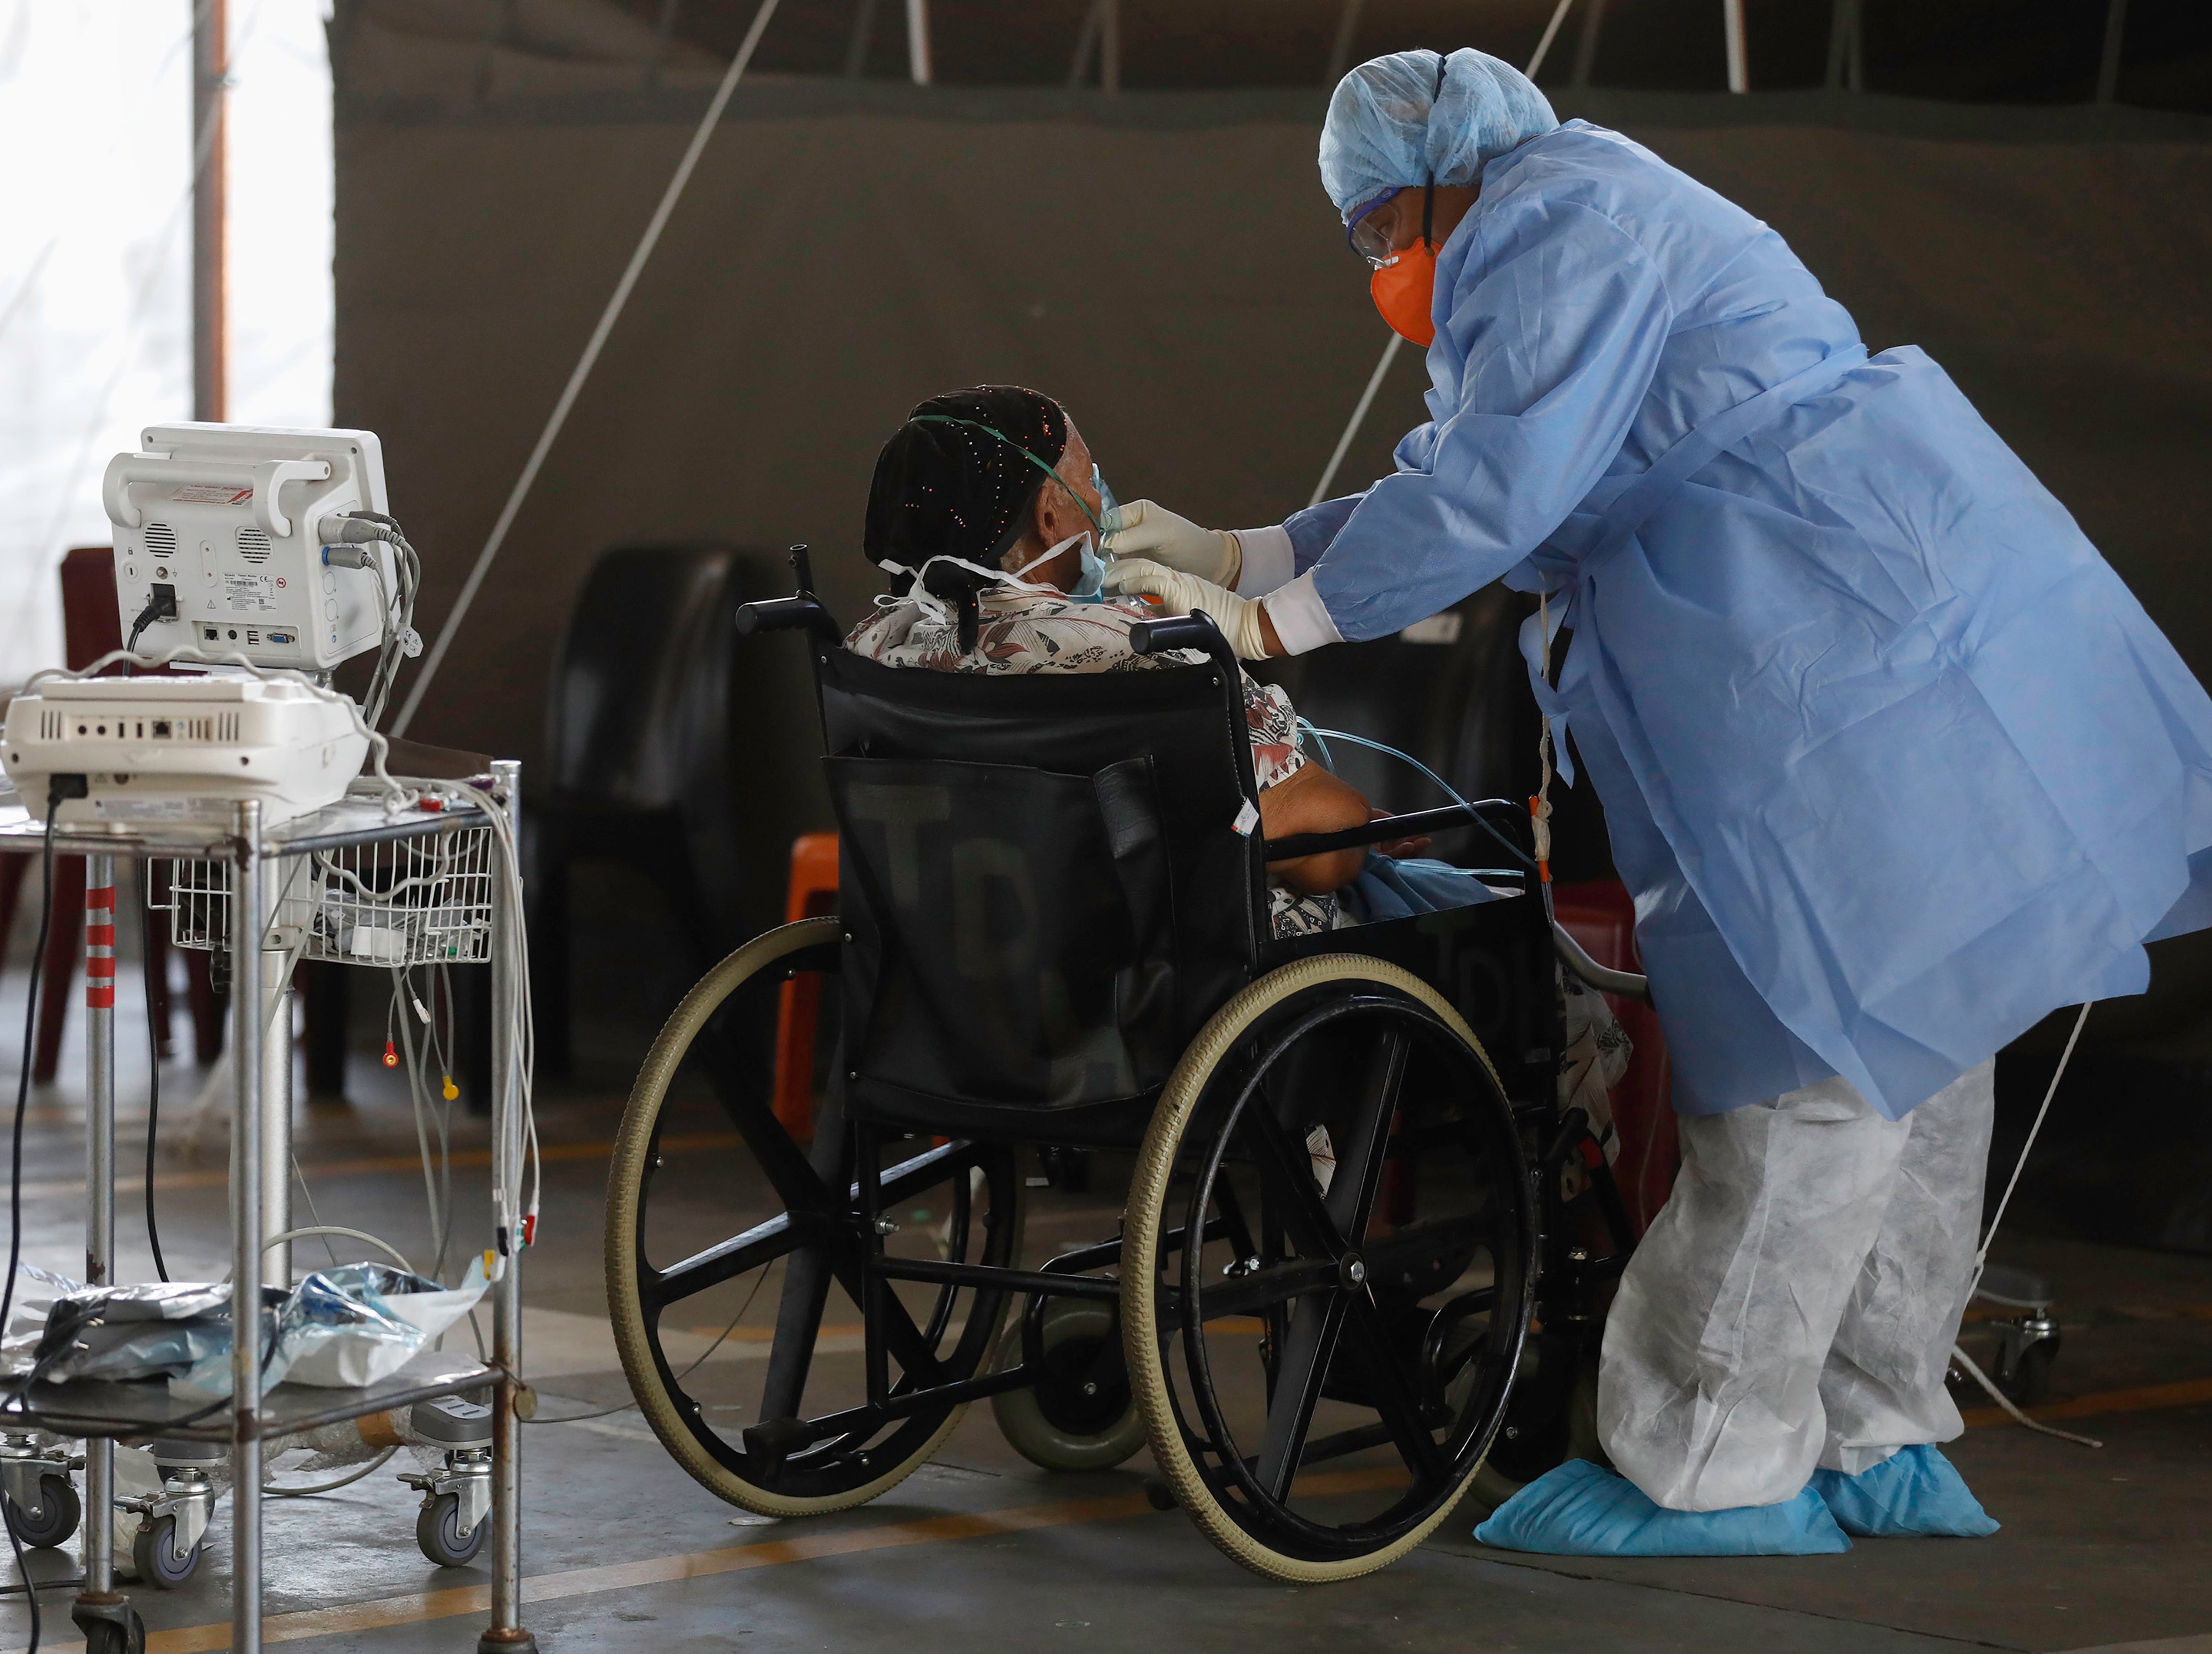 A healthcare worker wearing personal protective equipment (PPE) stands next to a patient at the temporary wards dedicated to the treatment of possible COVID-19 coronavirus patients at Steve Biko Academic Hospital in Pretoria, South Africa, 19 January 2021